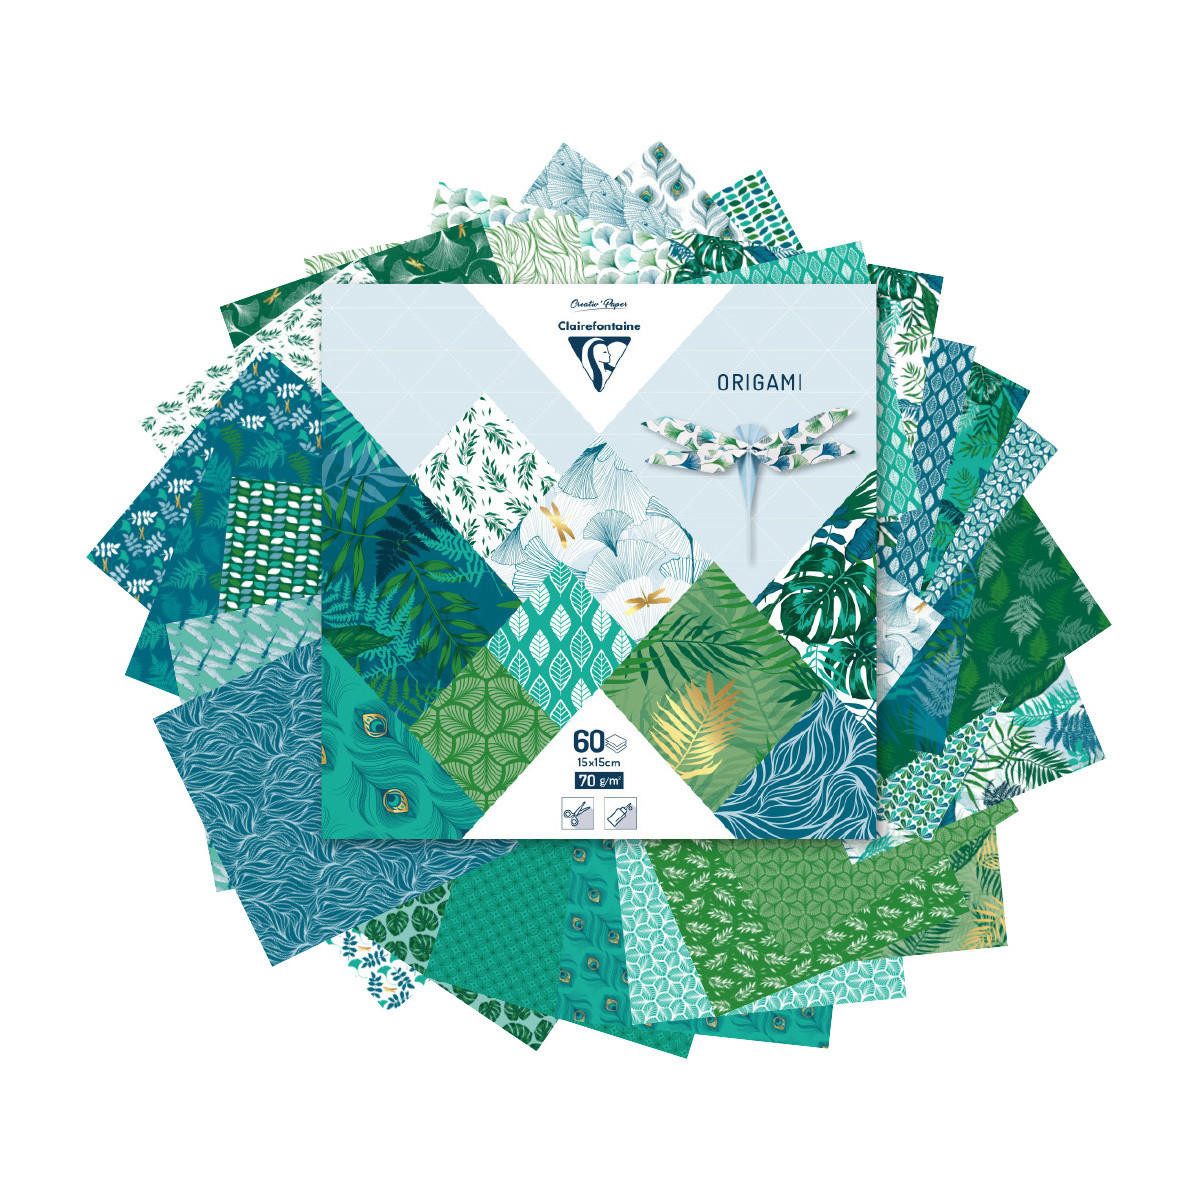 Clairefontaine Origami Pack Vegetal Chic 15 x 15cm